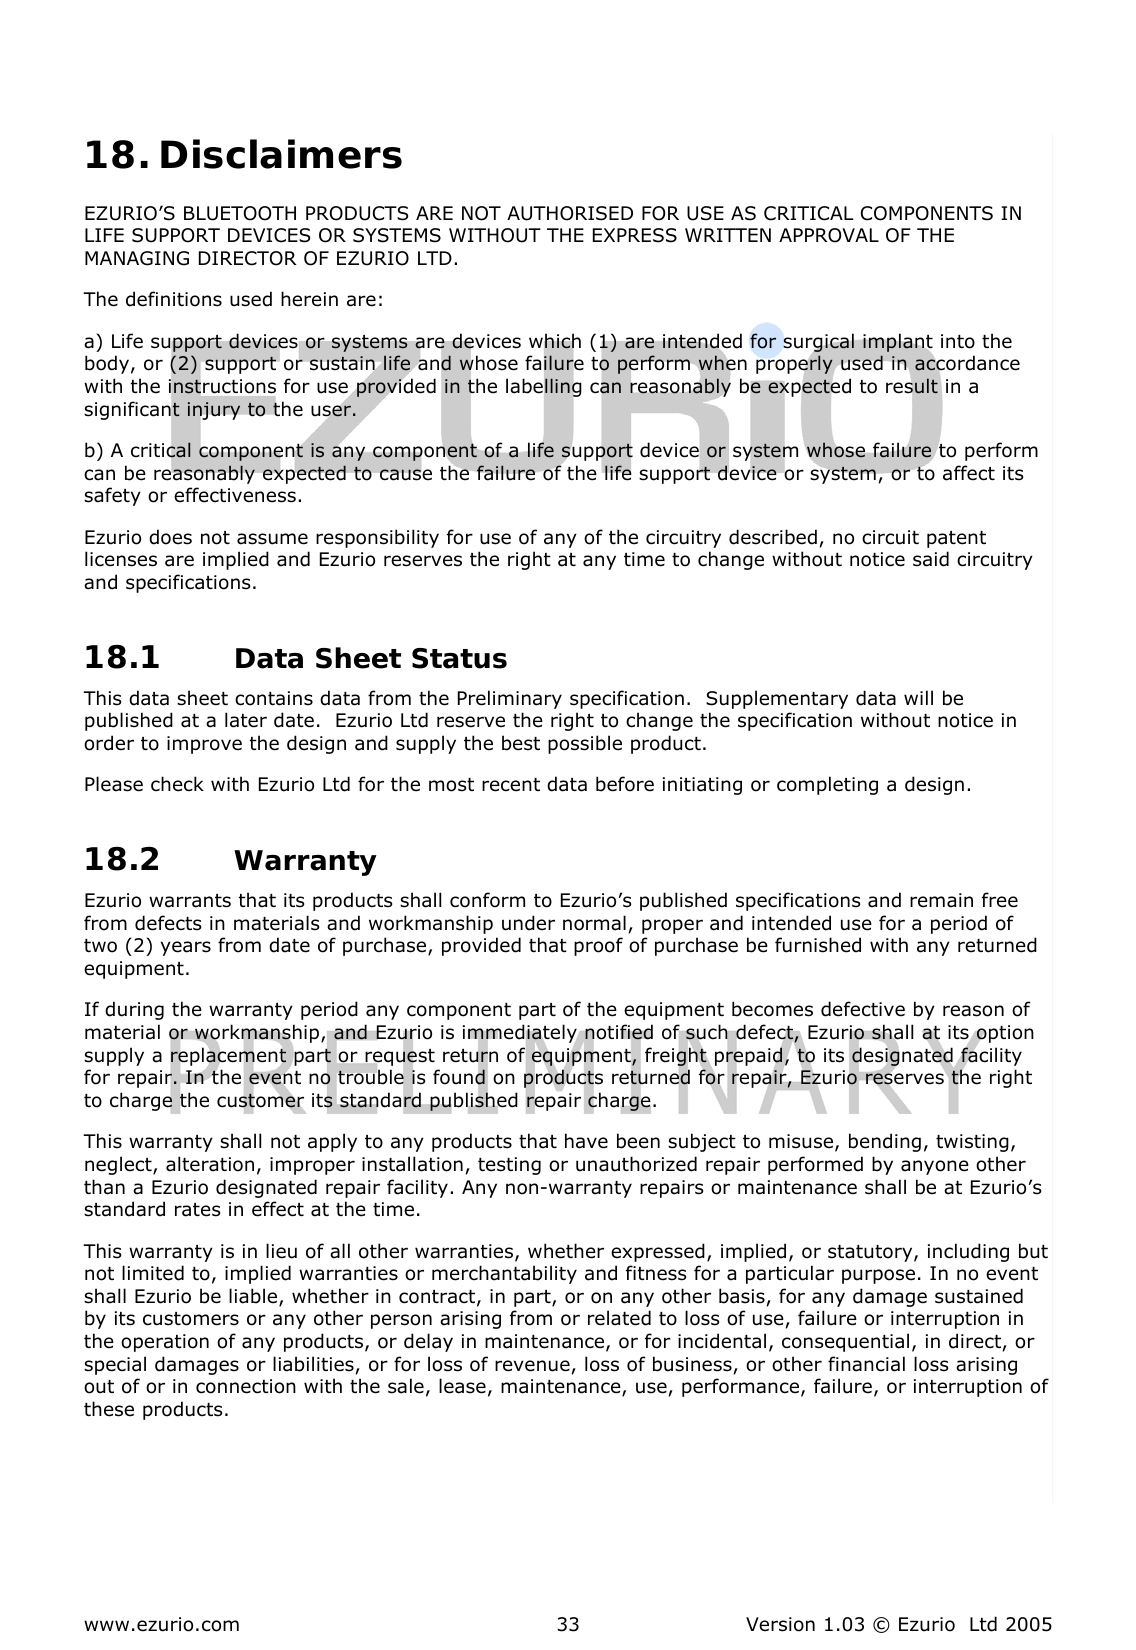  www.ezurio.com  Version 1.03 © Ezurio  Ltd 2005 33  18. Disclaimers EZURIO’S BLUETOOTH PRODUCTS ARE NOT AUTHORISED FOR USE AS CRITICAL COMPONENTS IN LIFE SUPPORT DEVICES OR SYSTEMS WITHOUT THE EXPRESS WRITTEN APPROVAL OF THE MANAGING DIRECTOR OF EZURIO LTD. The definitions used herein are: a) Life support devices or systems are devices which (1) are intended for surgical implant into the body, or (2) support or sustain life and whose failure to perform when properly used in accordance with the instructions for use provided in the labelling can reasonably be expected to result in a significant injury to the user. b) A critical component is any component of a life support device or system whose failure to perform can be reasonably expected to cause the failure of the life support device or system, or to affect its safety or effectiveness. Ezurio does not assume responsibility for use of any of the circuitry described, no circuit patent licenses are implied and Ezurio reserves the right at any time to change without notice said circuitry and specifications. 18.1 Data Sheet Status nty This data sheet contains data from the Preliminary specification.  Supplementary data will be published at a later date.  Ezurio Ltd reserve the right to change the specification without notice in order to improve the design and supply the best possible product. Please check with Ezurio Ltd for the most recent data before initiating or completing a design. 18.2 WarraEzurio warrants that its products shall conform to Ezurio’s published specifications and remain free from defects in materials and workmanship under normal, proper and intended use for a period of two (2) years from date of purchase, provided that proof of purchase be furnished with any returned equipment. If during the warranty period any component part of the equipment becomes defective by reason of material or workmanship, and Ezurio is immediately notified of such defect, Ezurio shall at its option supply a replacement part or request return of equipment, freight prepaid, to its designated facility for repair. In the event no trouble is found on products returned for repair, Ezurio reserves the right to charge the customer its standard published repair charge. This warranty shall not apply to any products that have been subject to misuse, bending, twisting, neglect, alteration, improper installation, testing or unauthorized repair performed by anyone other than a Ezurio designated repair facility. Any non-warranty repairs or maintenance shall be at Ezurio’s standard rates in effect at the time. This warranty is in lieu of all other warranties, whether expressed, implied, or statutory, including but not limited to, implied warranties or merchantability and fitness for a particular purpose. In no event shall Ezurio be liable, whether in contract, in part, or on any other basis, for any damage sustained by its customers or any other person arising from or related to loss of use, failure or interruption in the operation of any products, or delay in maintenance, or for incidental, consequential, in direct, or special damages or liabilities, or for loss of revenue, loss of business, or other financial loss arising out of or in connection with the sale, lease, maintenance, use, performance, failure, or interruption of these products.  